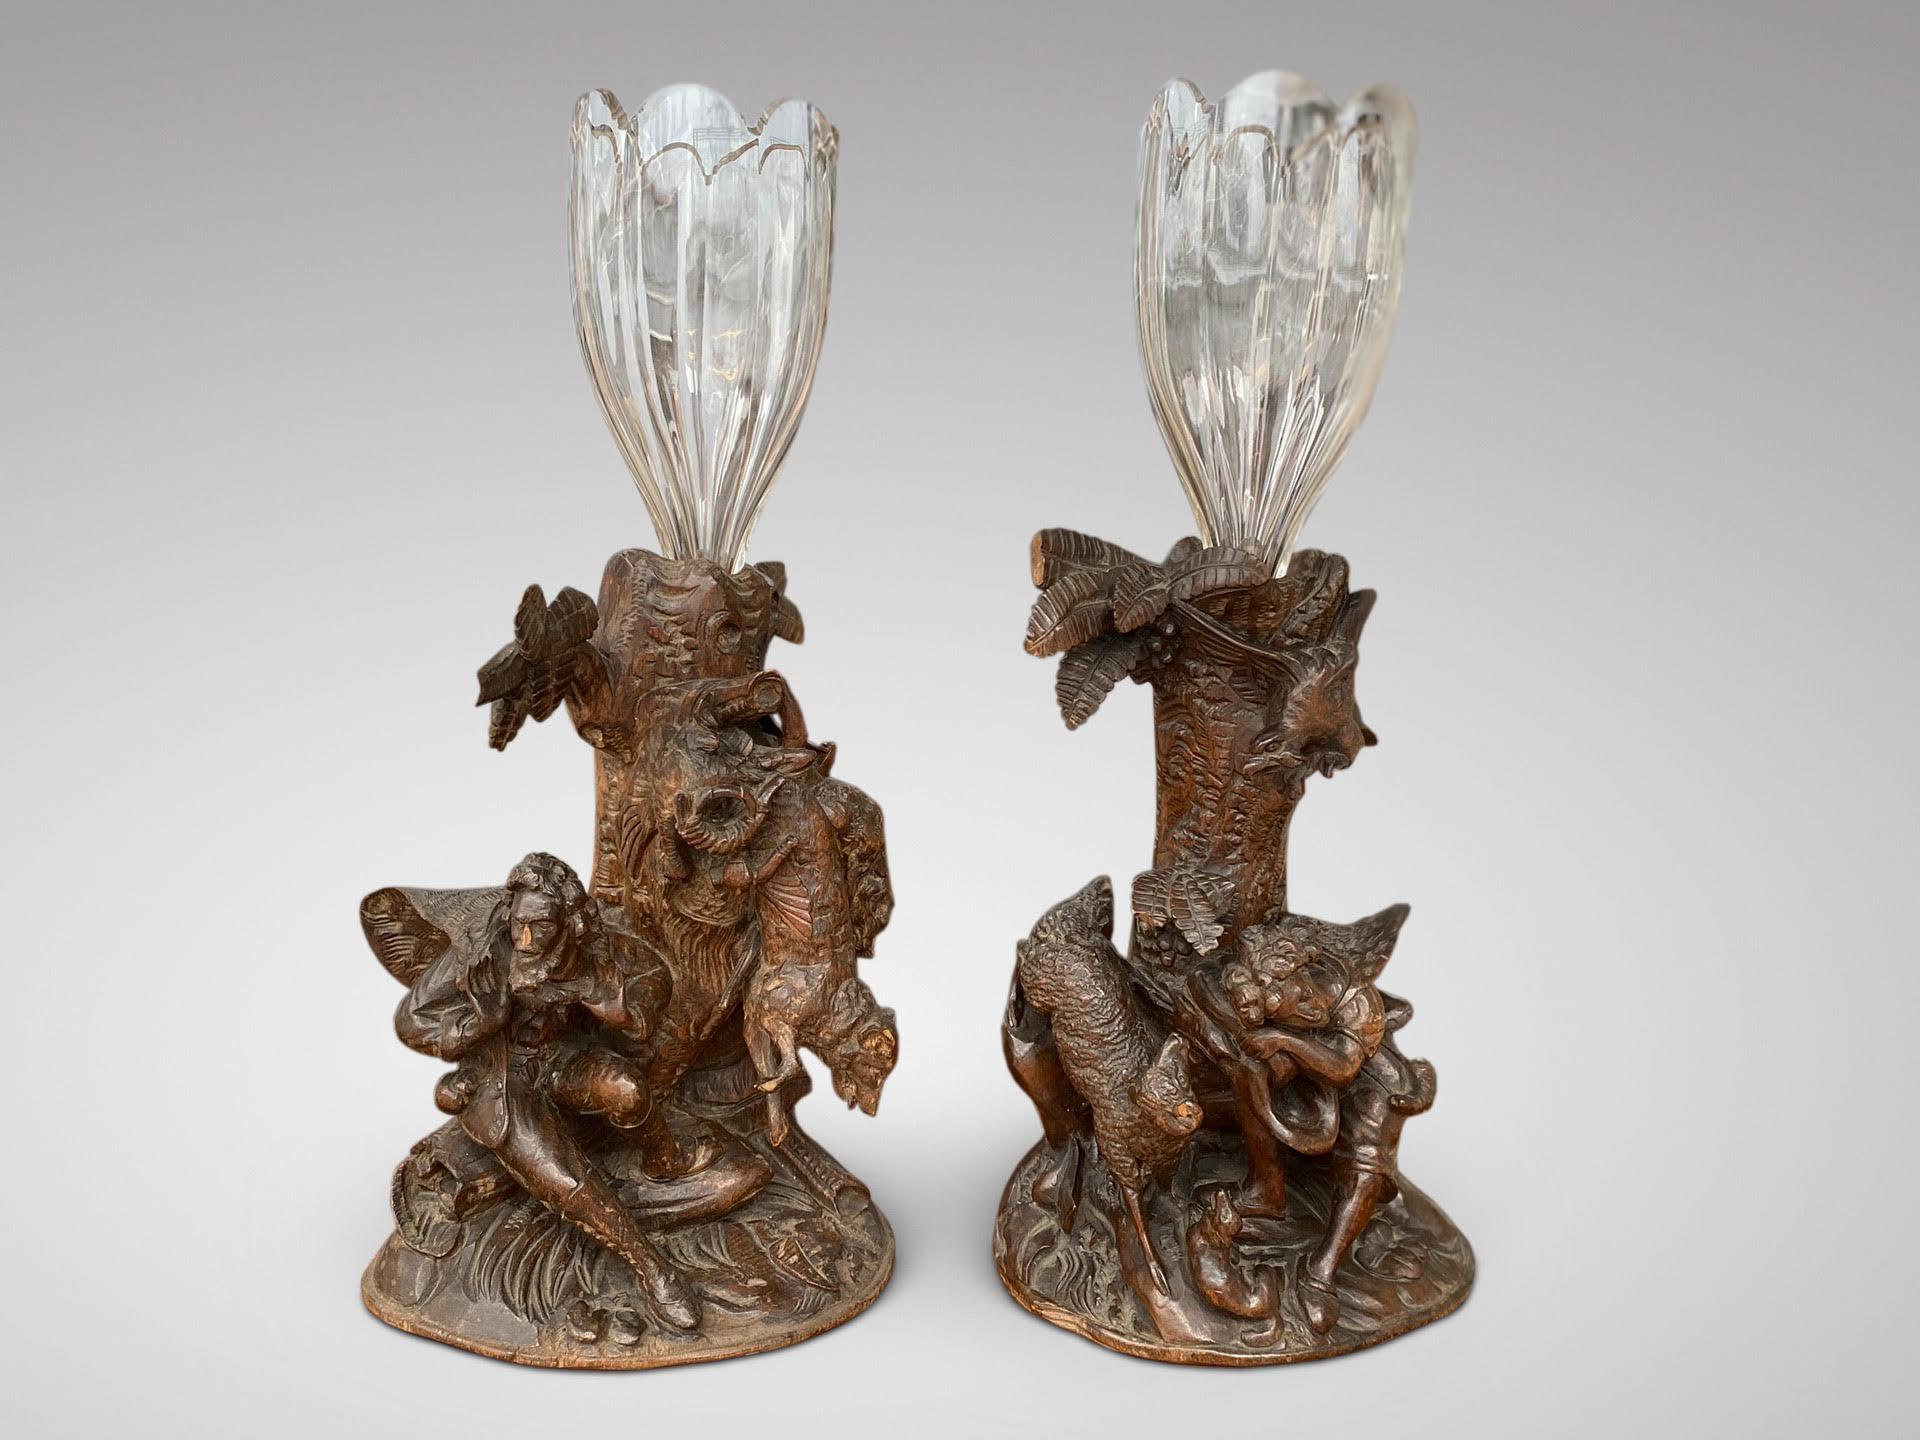 A beautiful pair of 19th century carved wood black forest hunting scene, shaped glass flower vases. In perfect original condition. 

The dimensions are:
Height: 42.5cm (16.7in)
Width: 20cm (7.9in)
Depth: 14cm (5.5in)

This pair of carved wood black